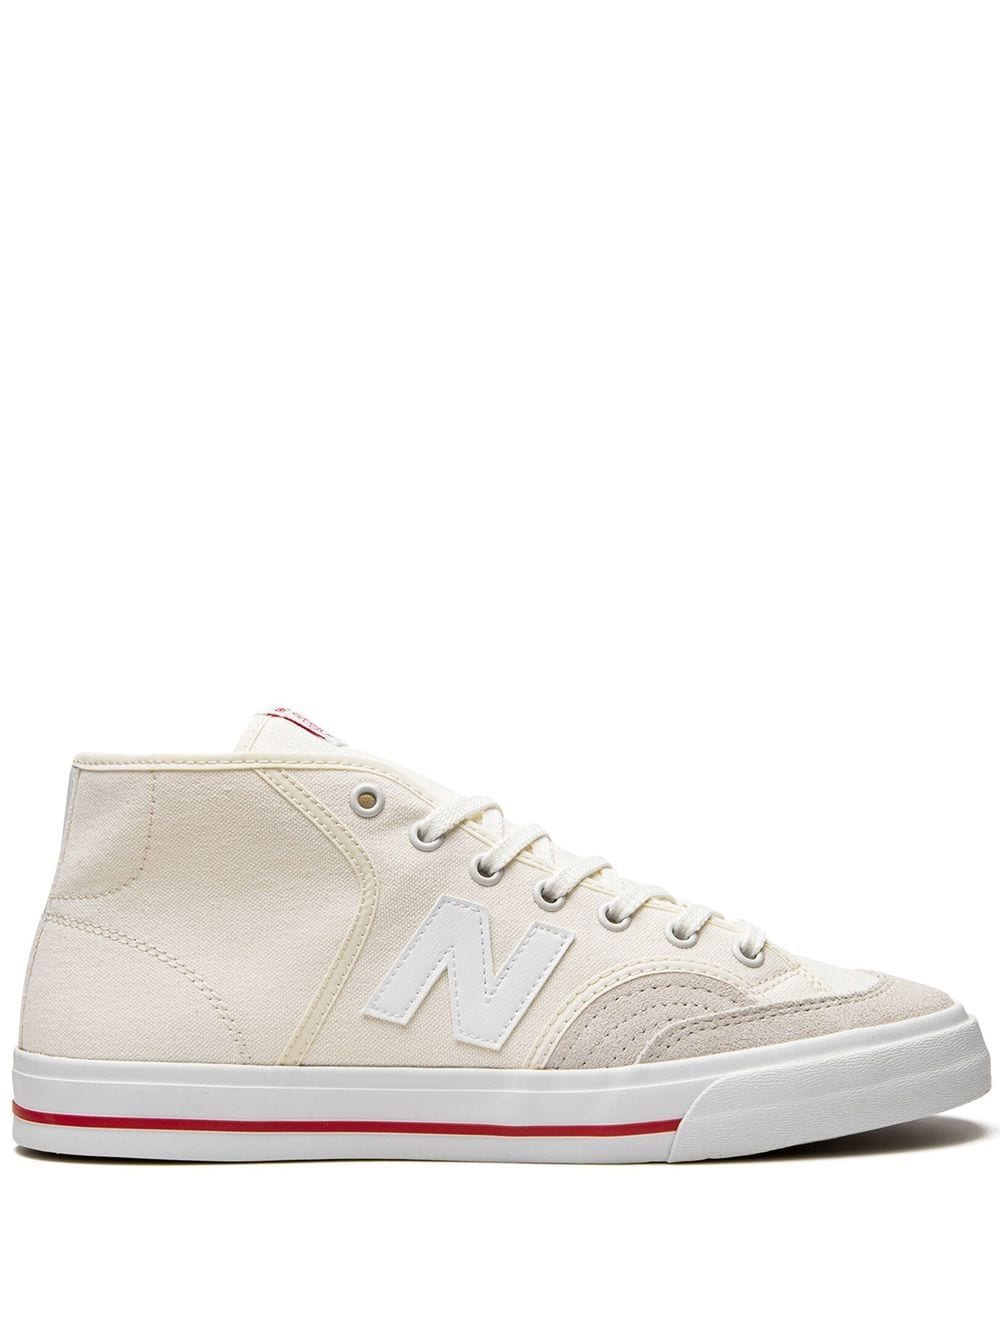 New Balance Numeric 213 Pro Court Sneakers In Nude